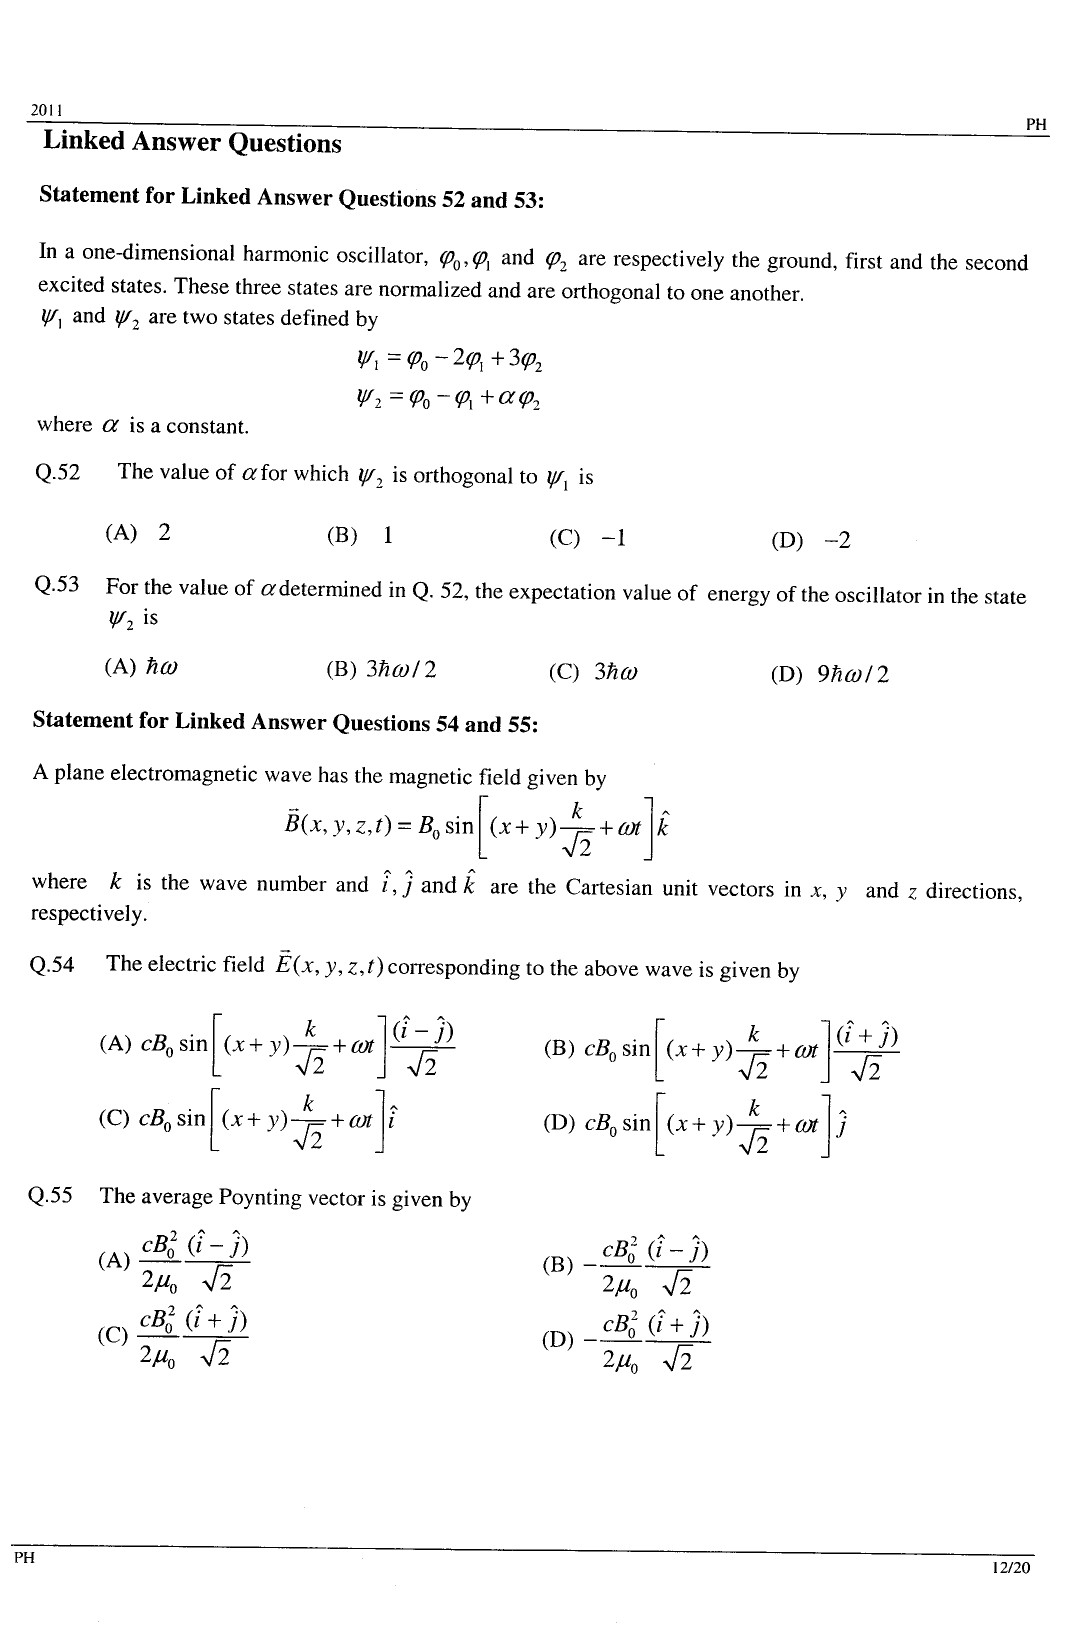 GATE Exam Question Paper 2011 Physics 12